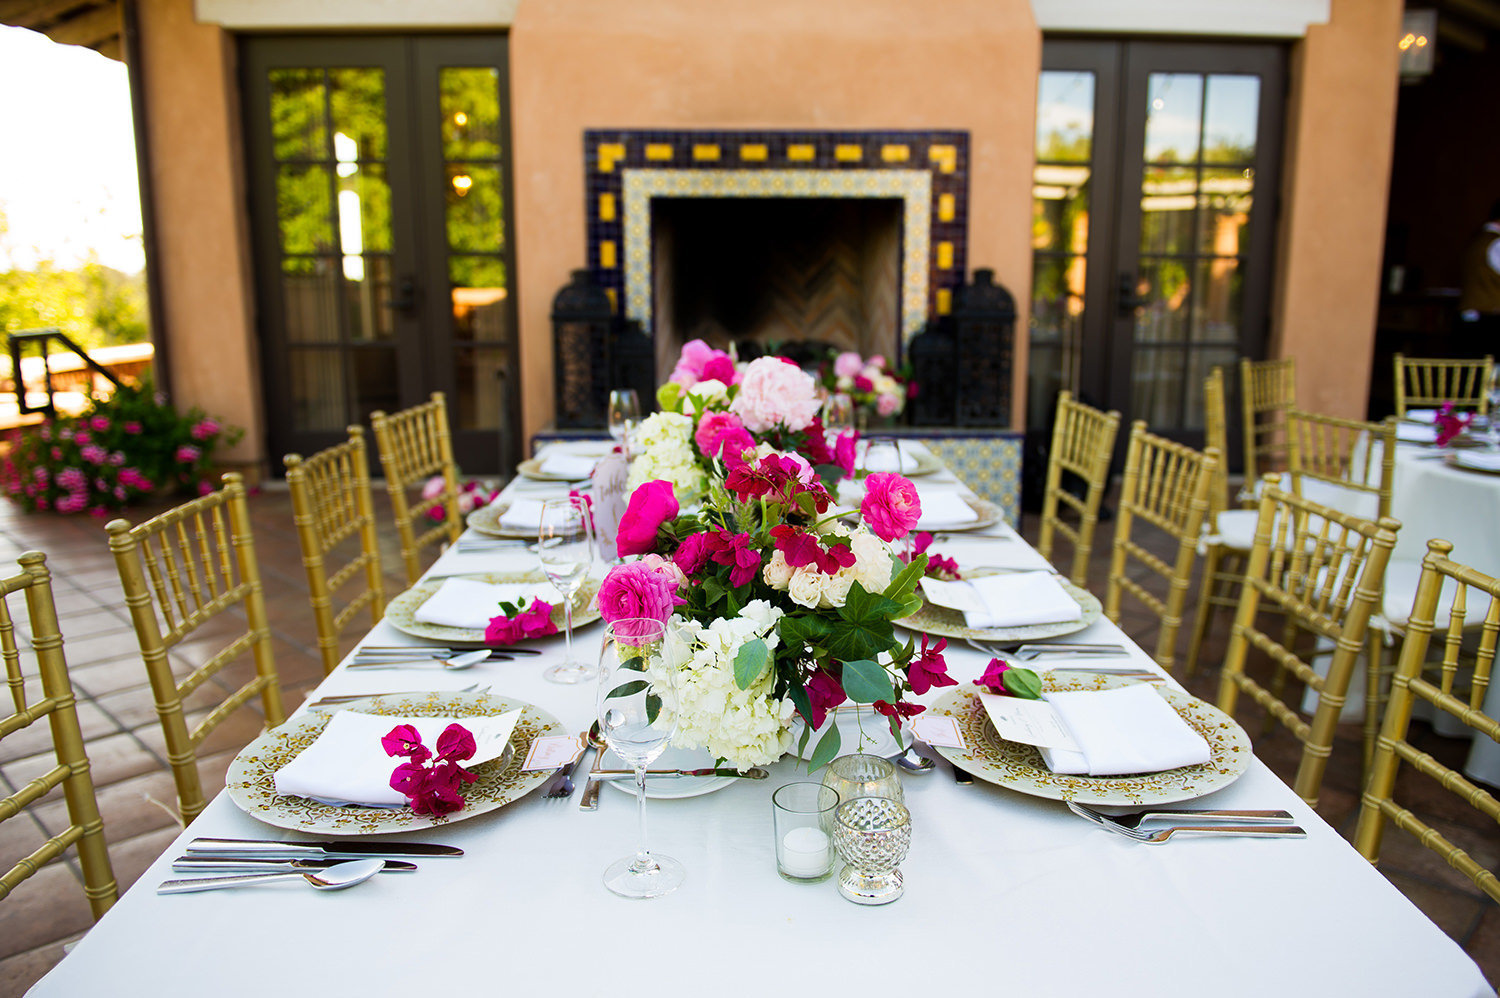 Exquisite table setting at a luxury wedding held at Rancho Valencia